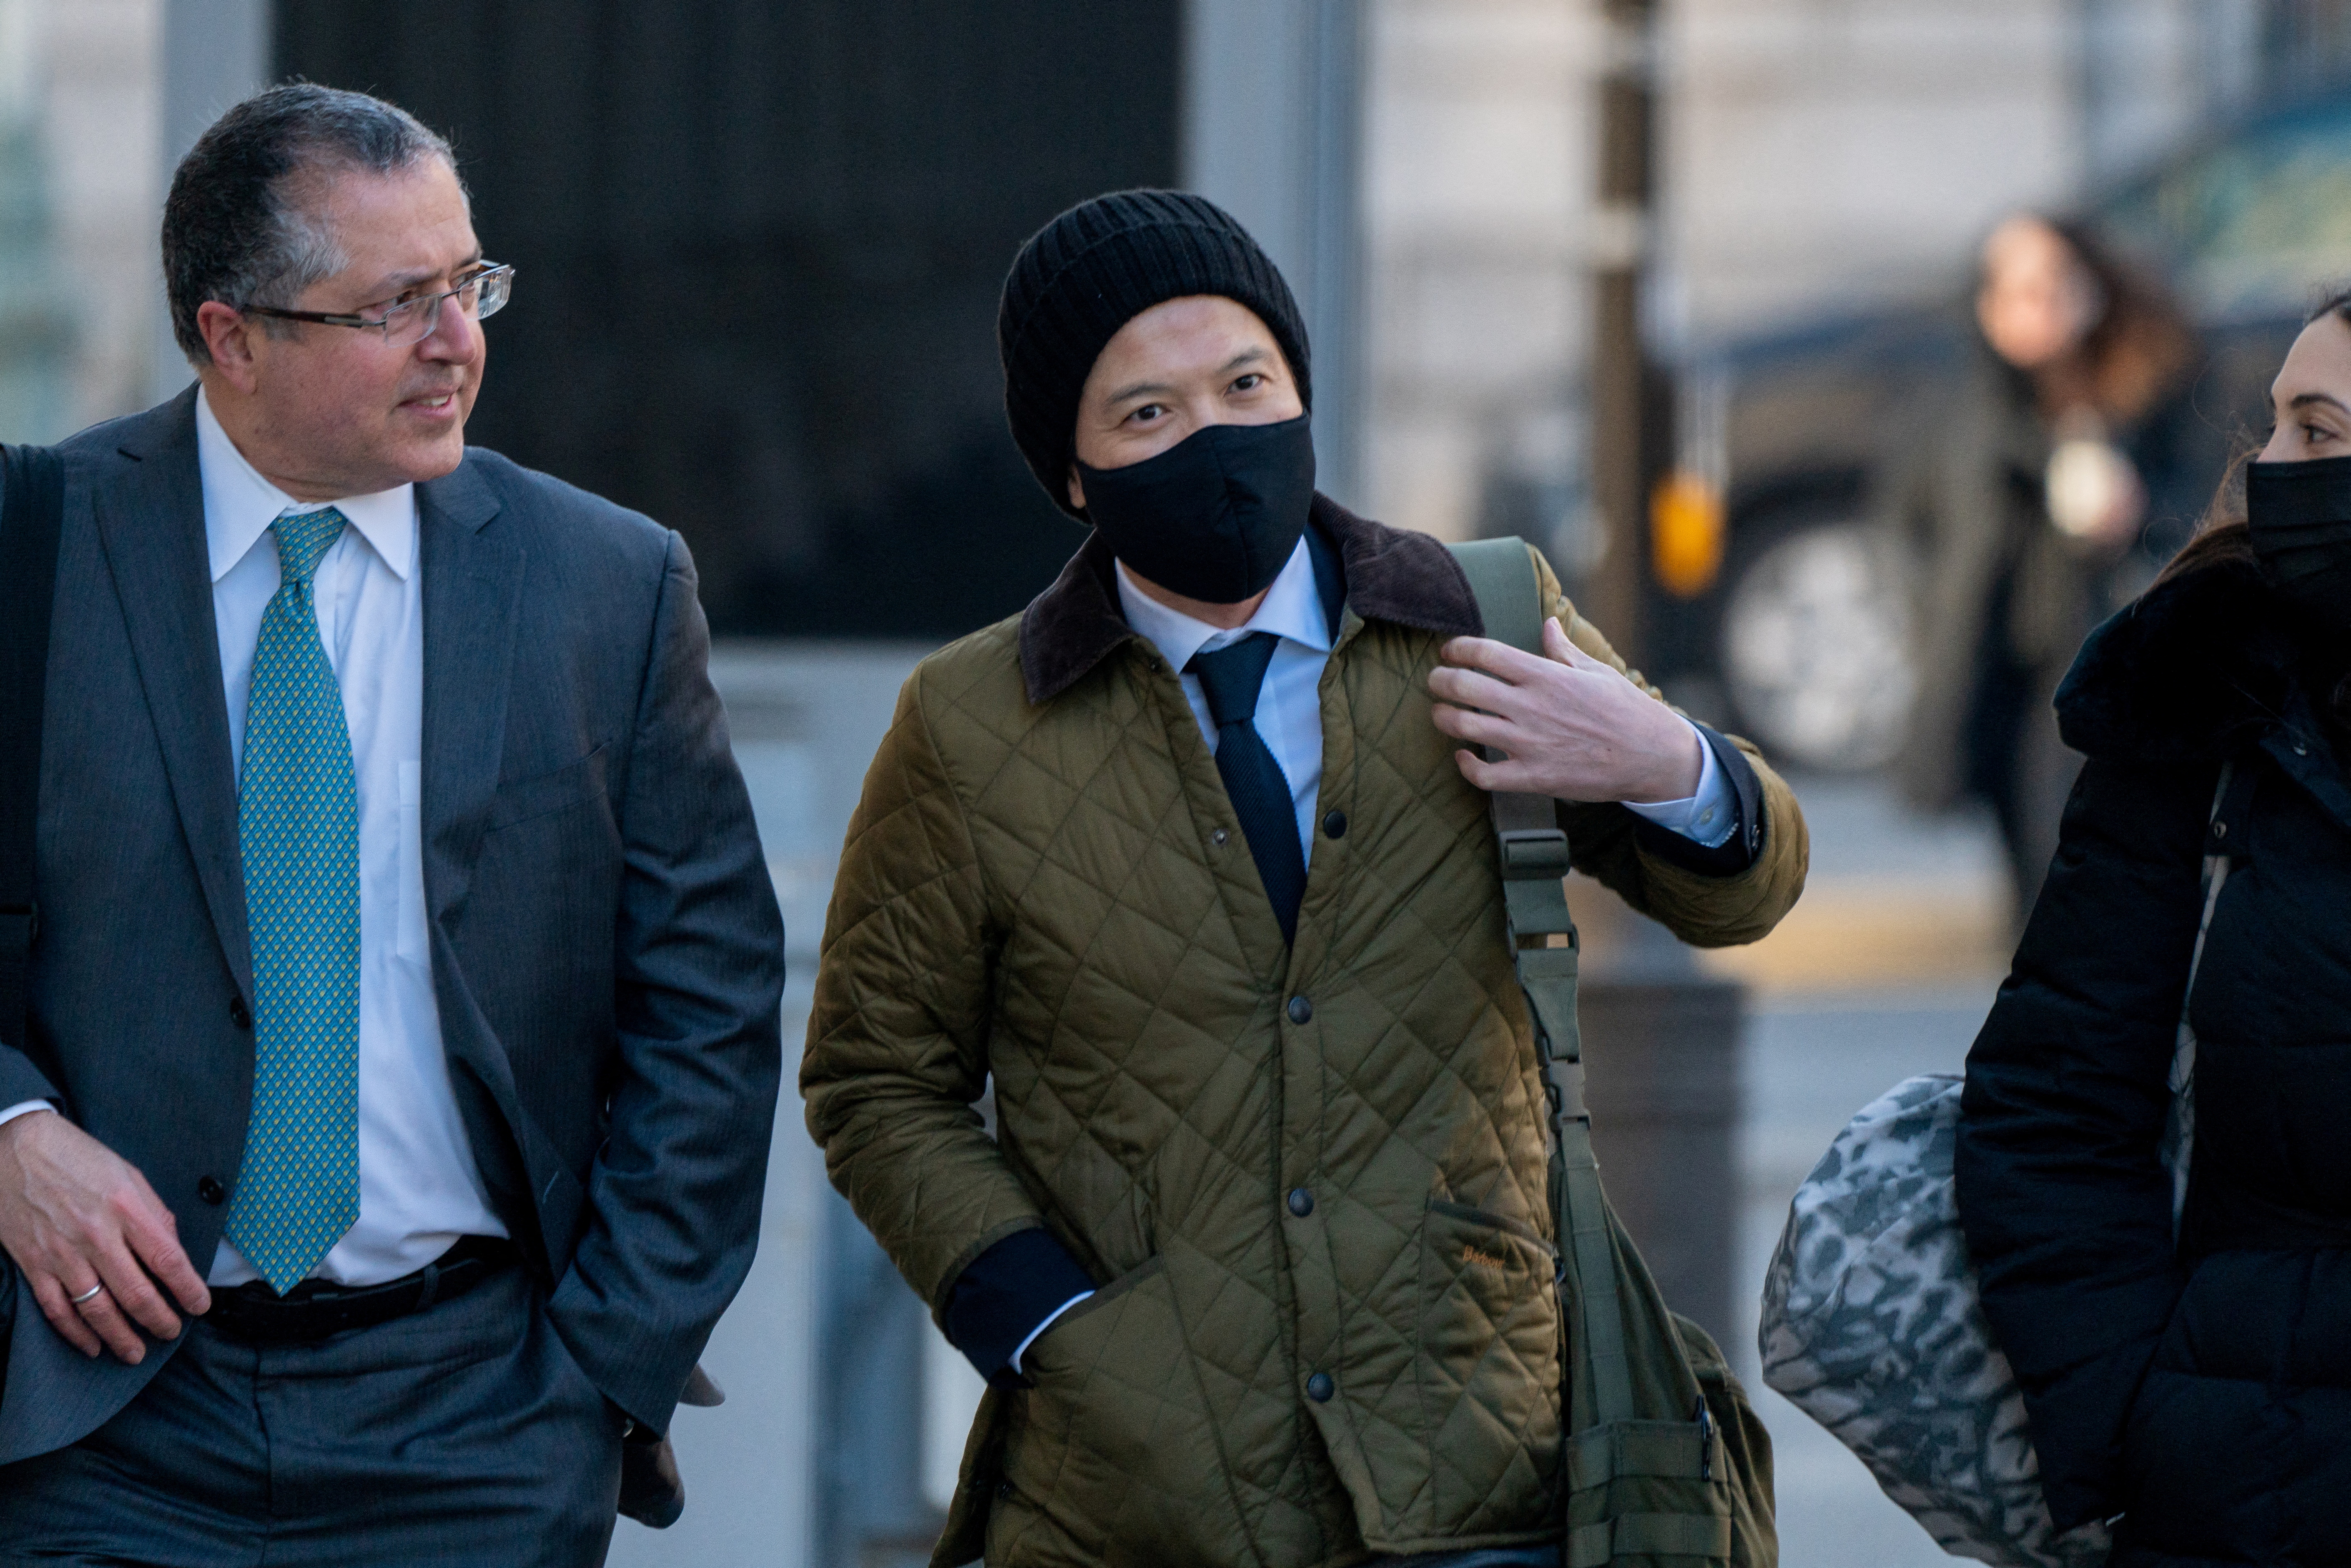 Ex-Goldman Sachs banker Roger Ng arrives at federal court for the jury selection process, in New York